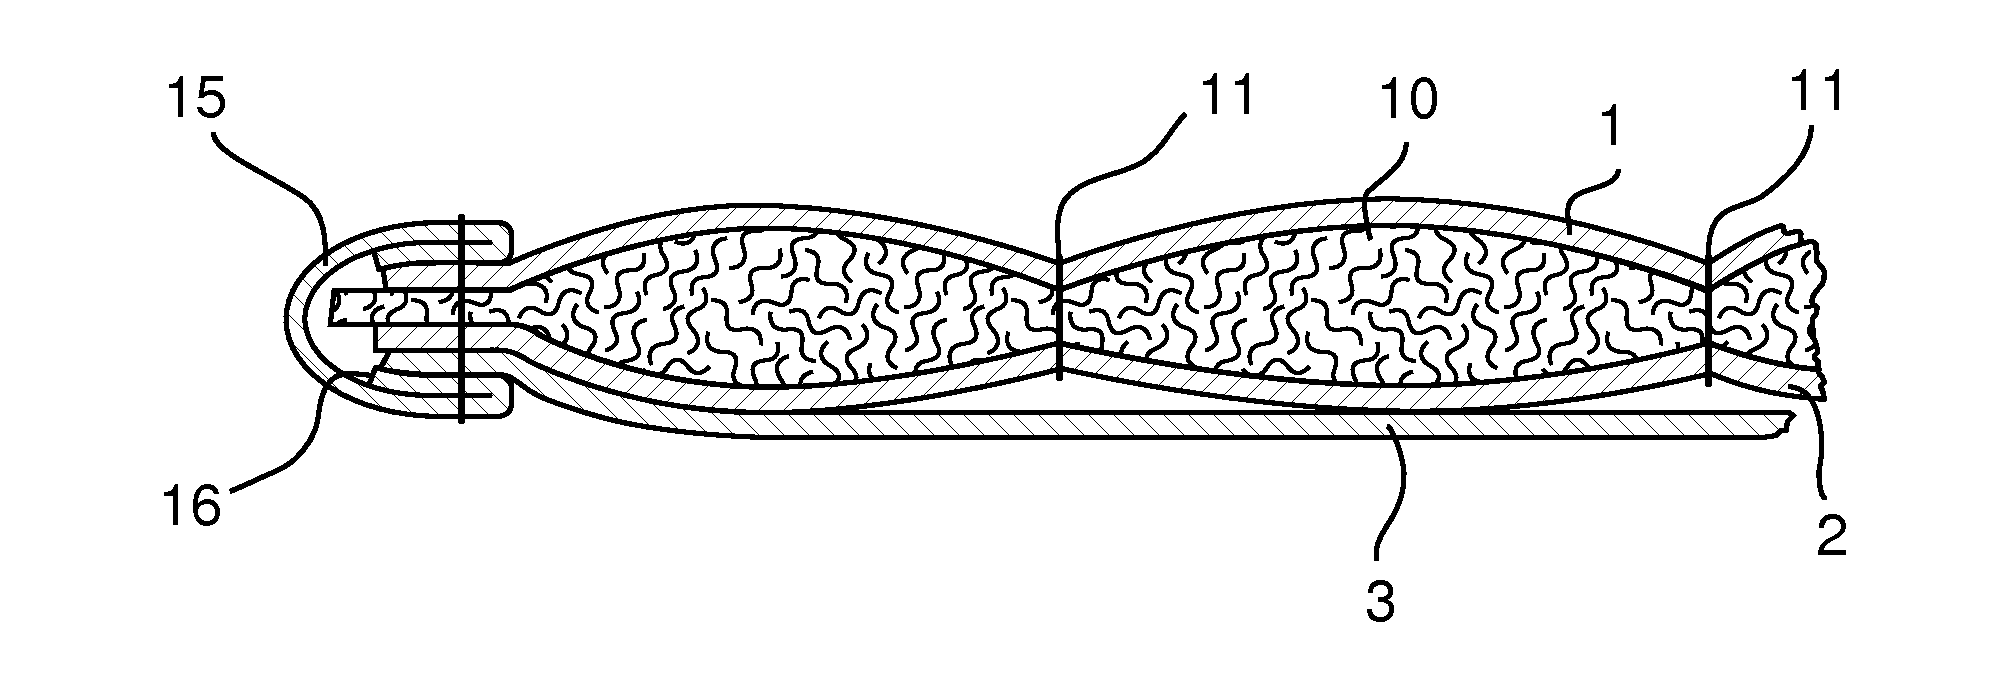 Coverlet and Method of Producing a Coverlet